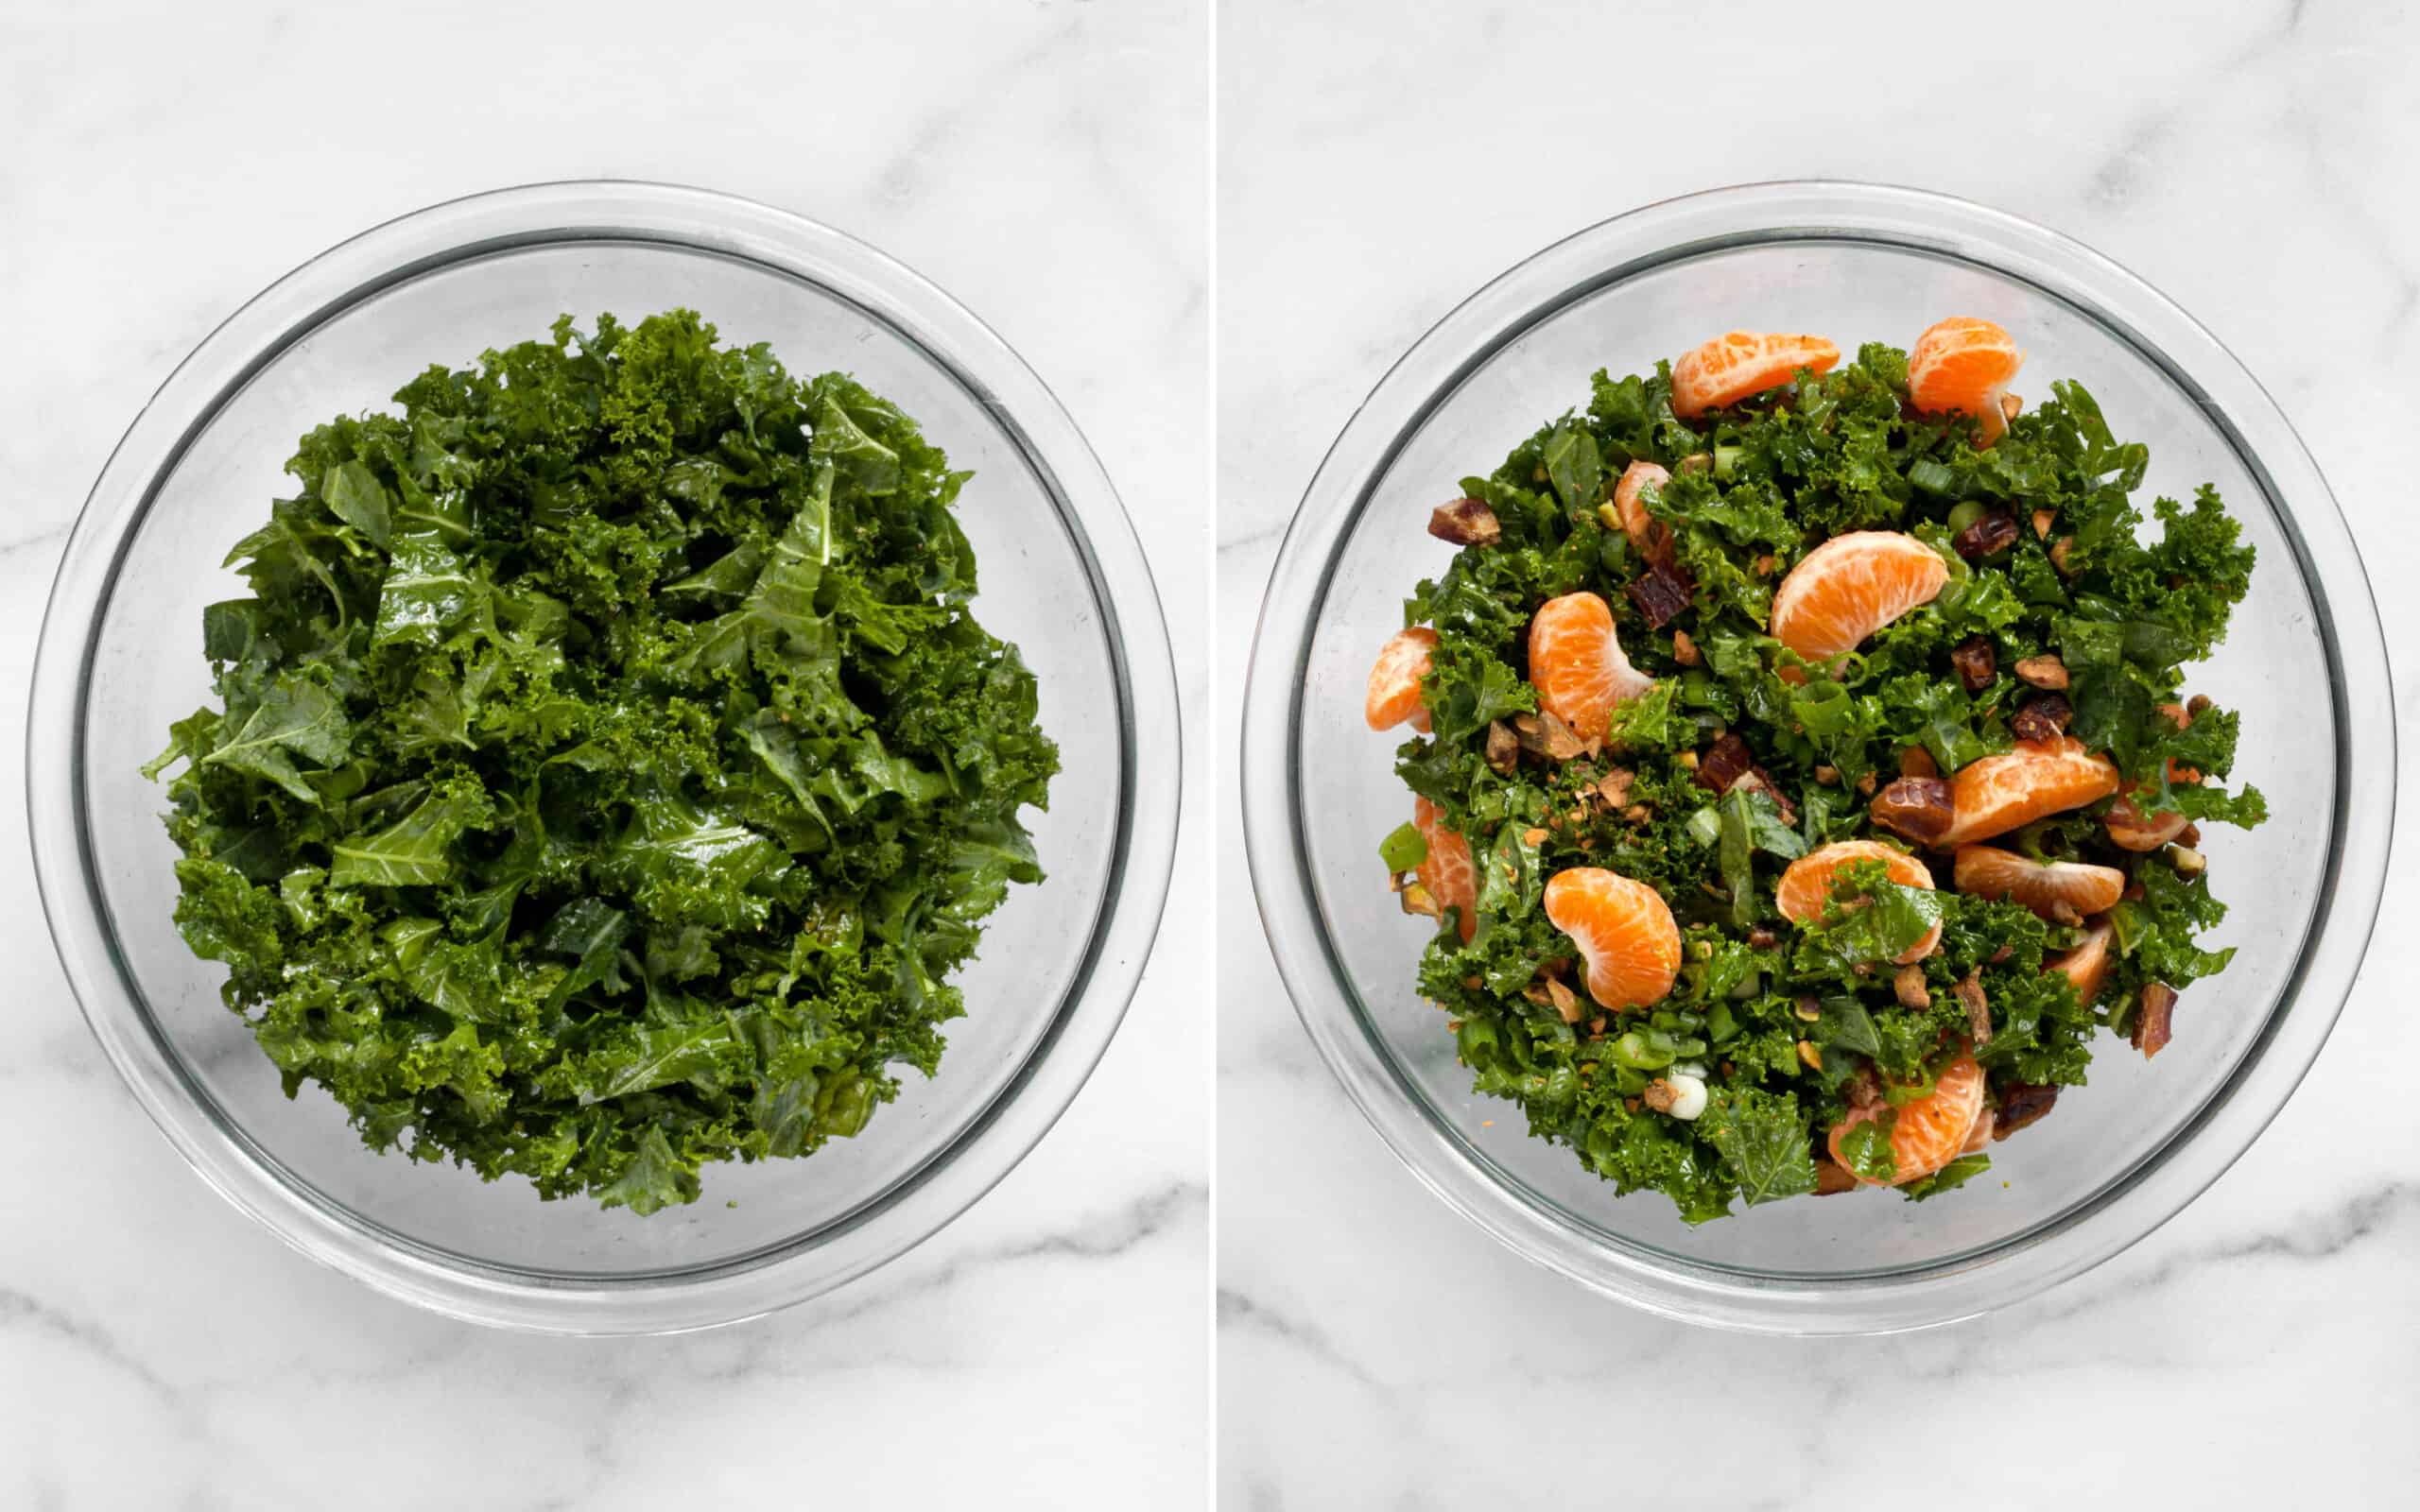 Massage the vinaigrette into the kale and stir int he oranges, pistachios and dates in a large bowl